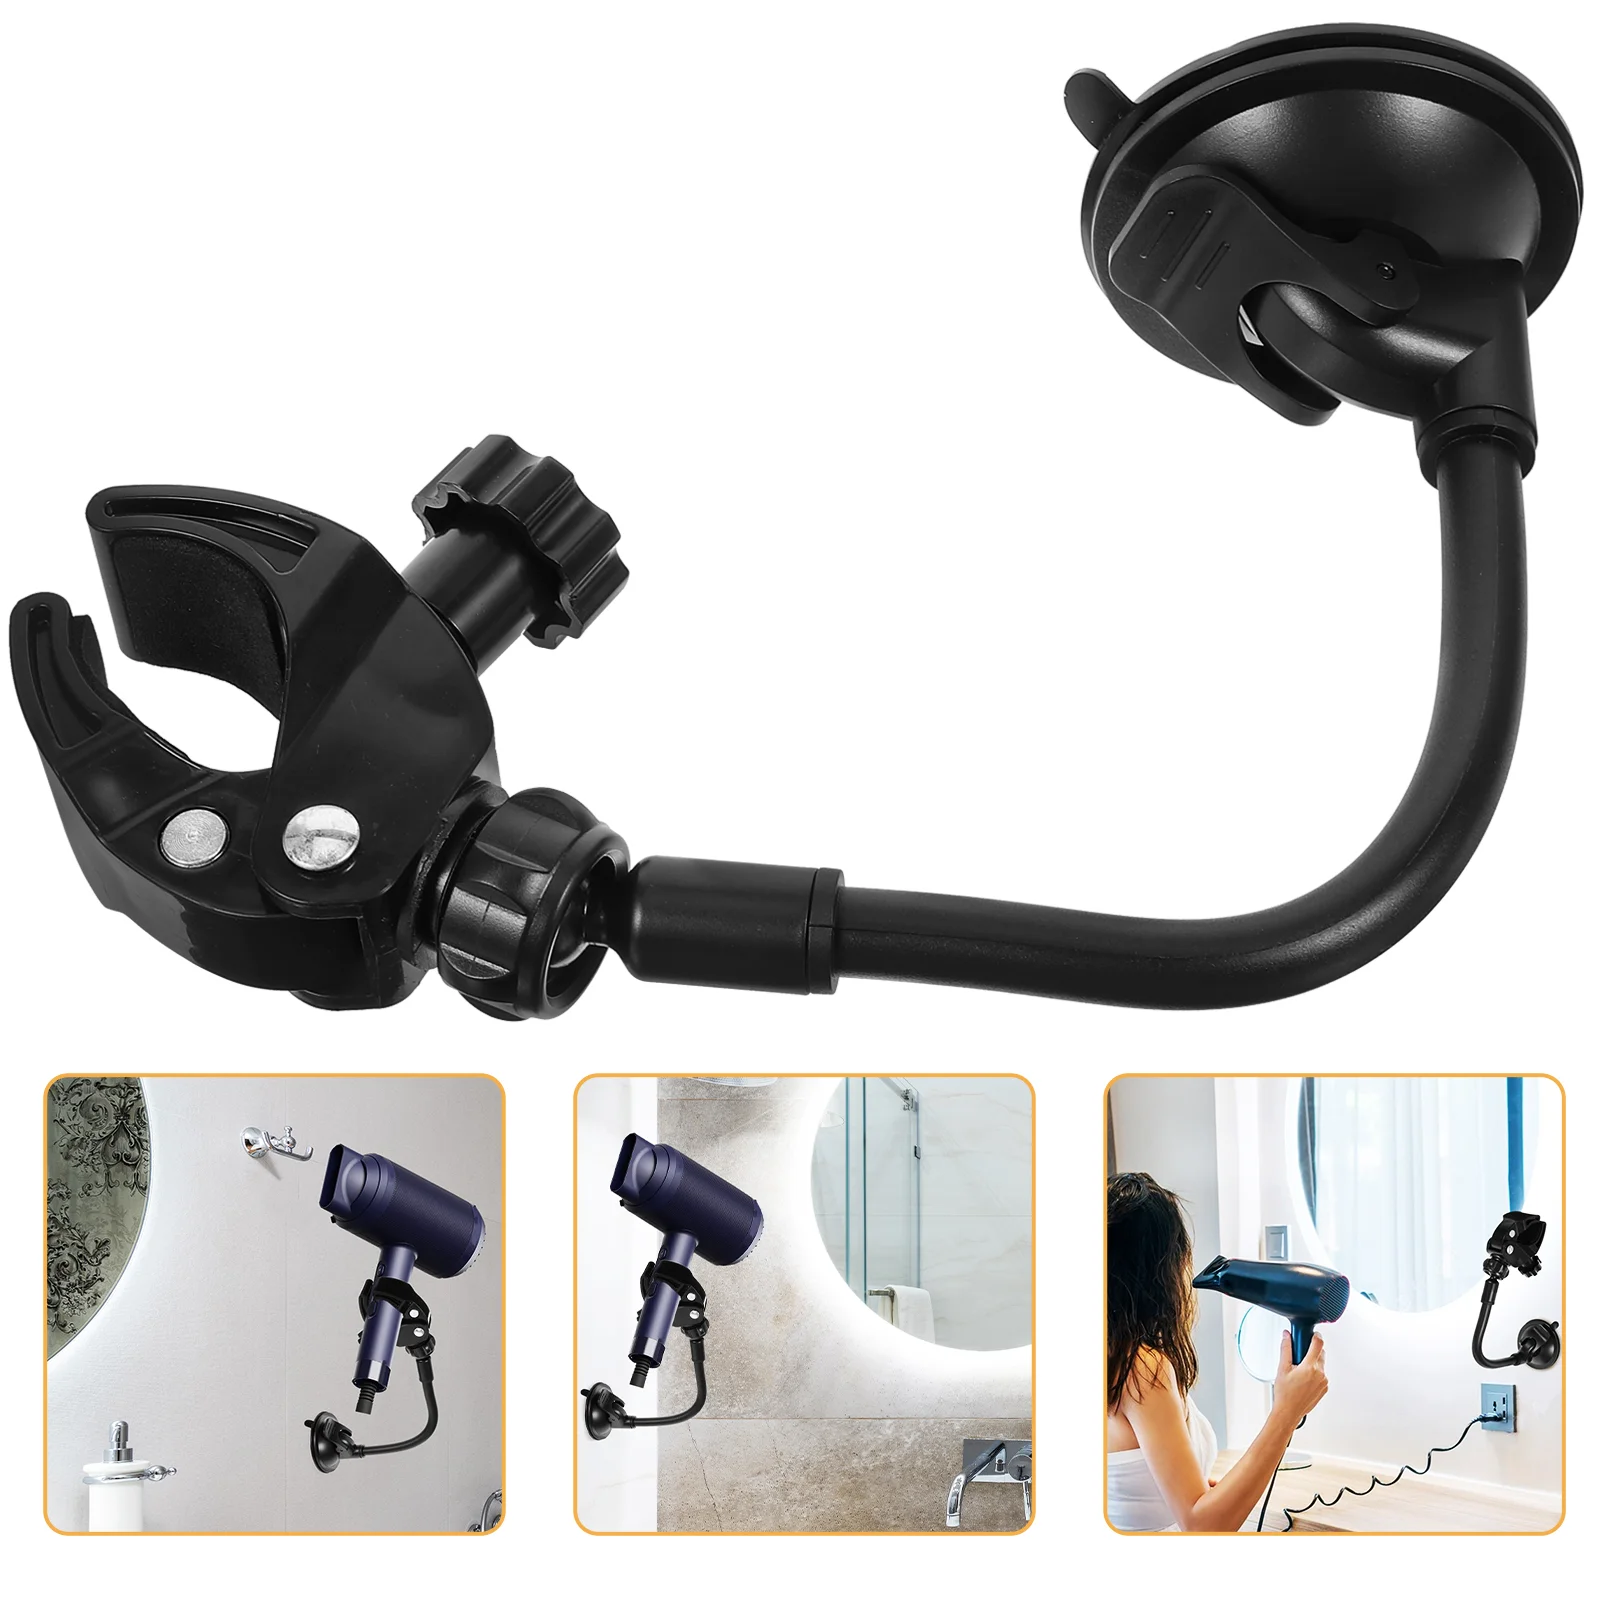 

Hair Dryer Hands-free Holder Degrees Rotation Flexible Multi-use Suction Cup Wall Mount Blow Dryer Stand for Bathroom